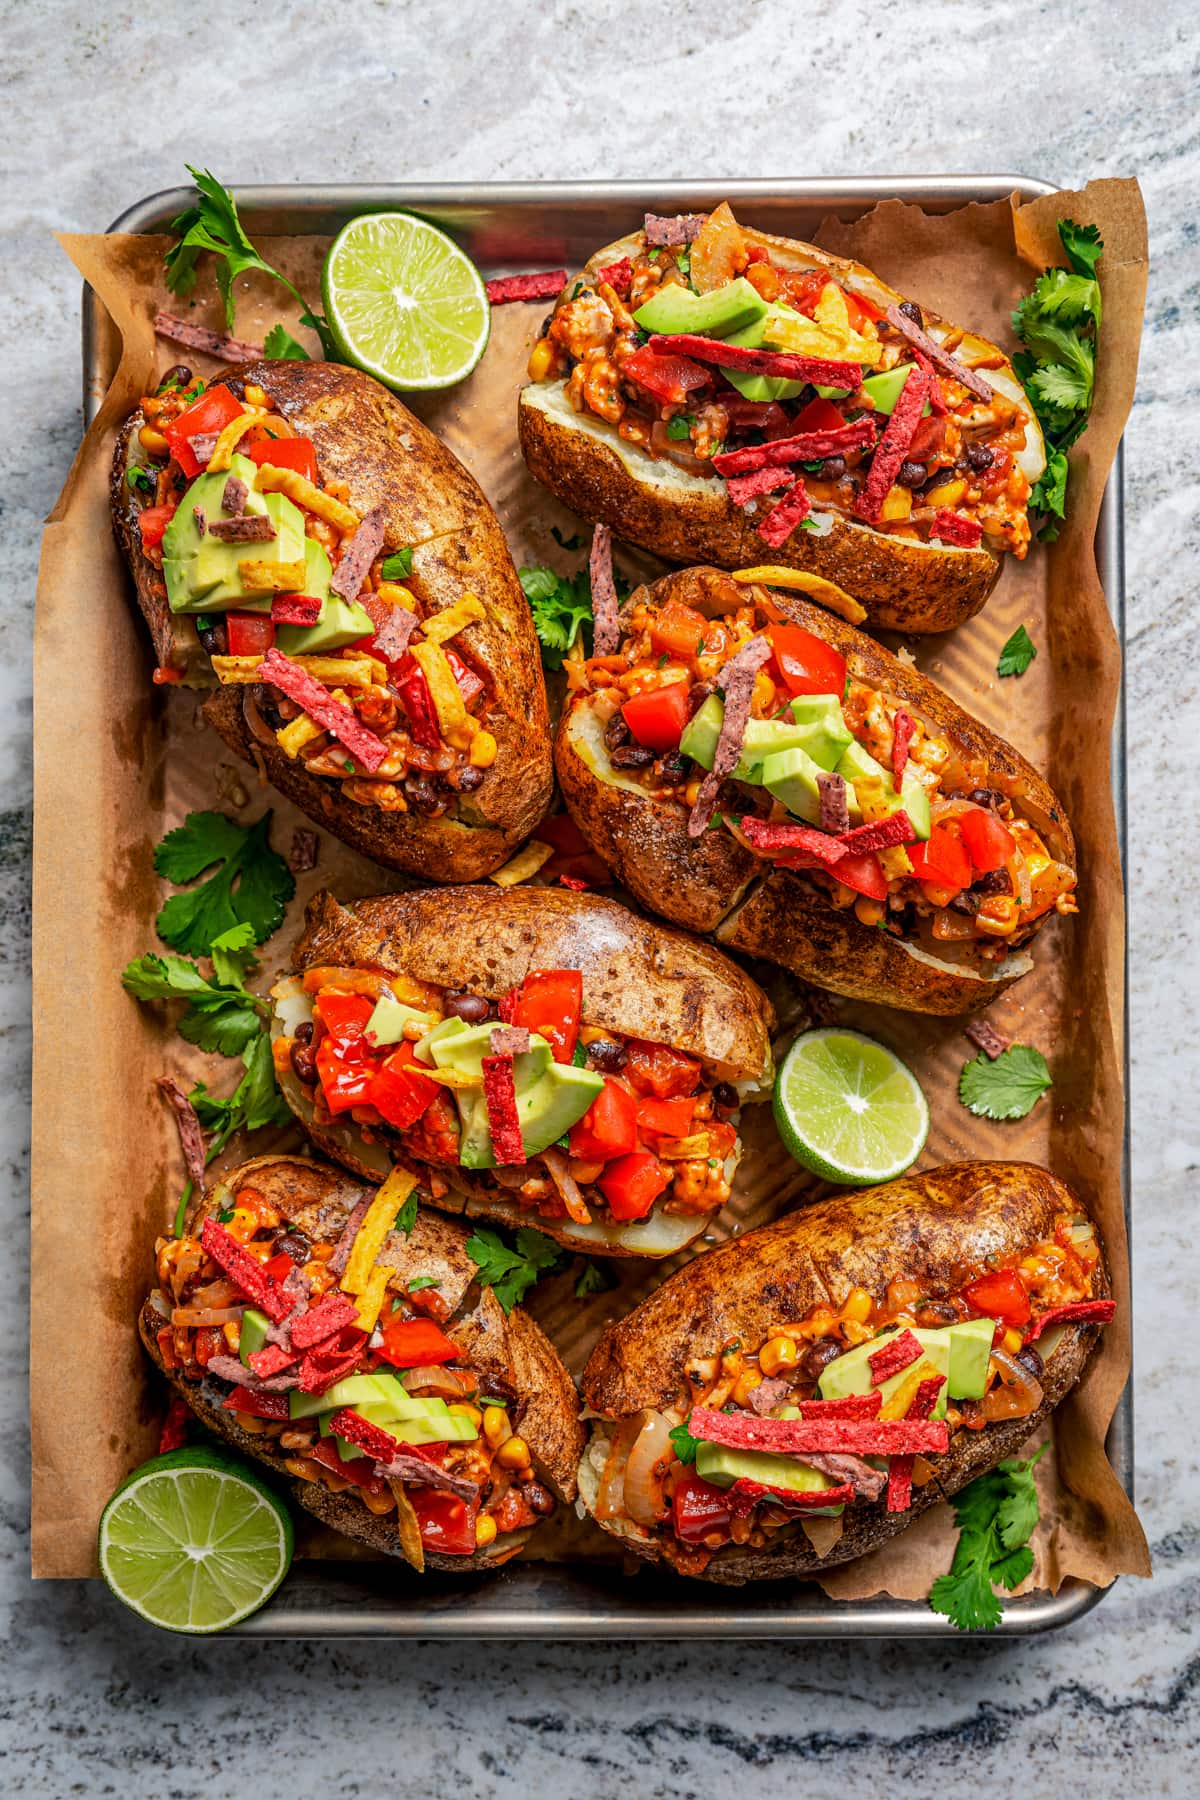 Loaded baked potatoes arranged on a serving tray.